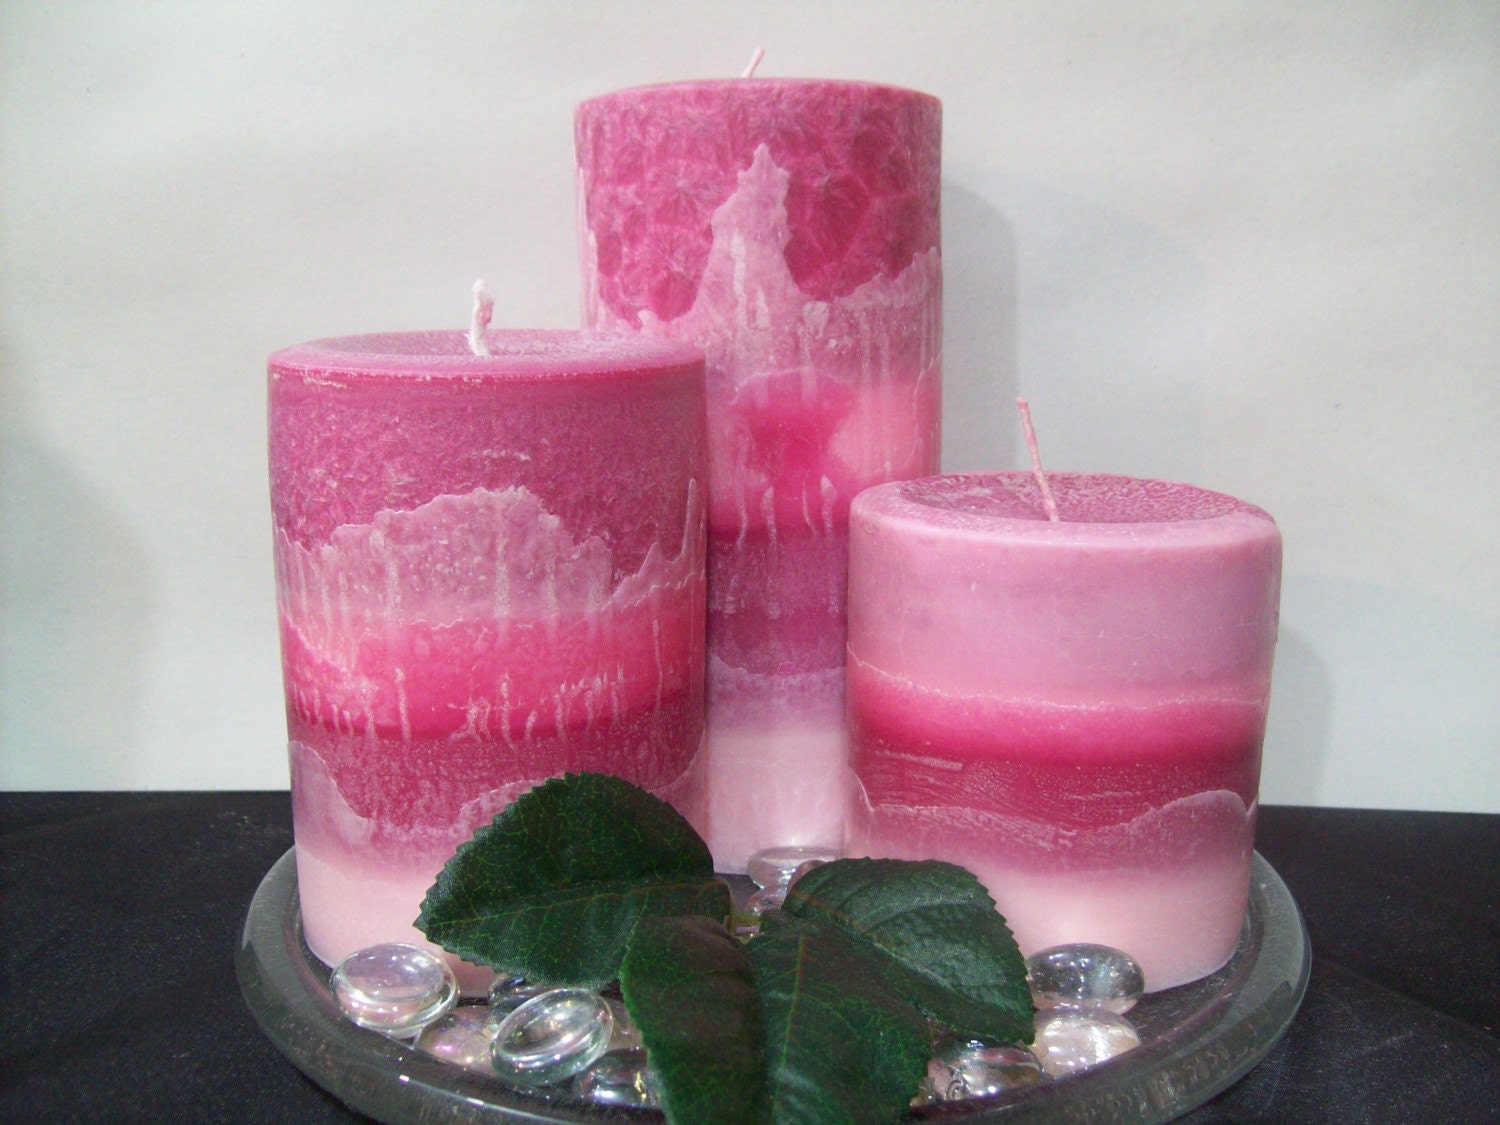 ON SALE- Imagine Love ( Bath and Body Works Type),Large Pillar Candles, Set of 3, Palm Wax by CrystalgardenCandles on Etsy